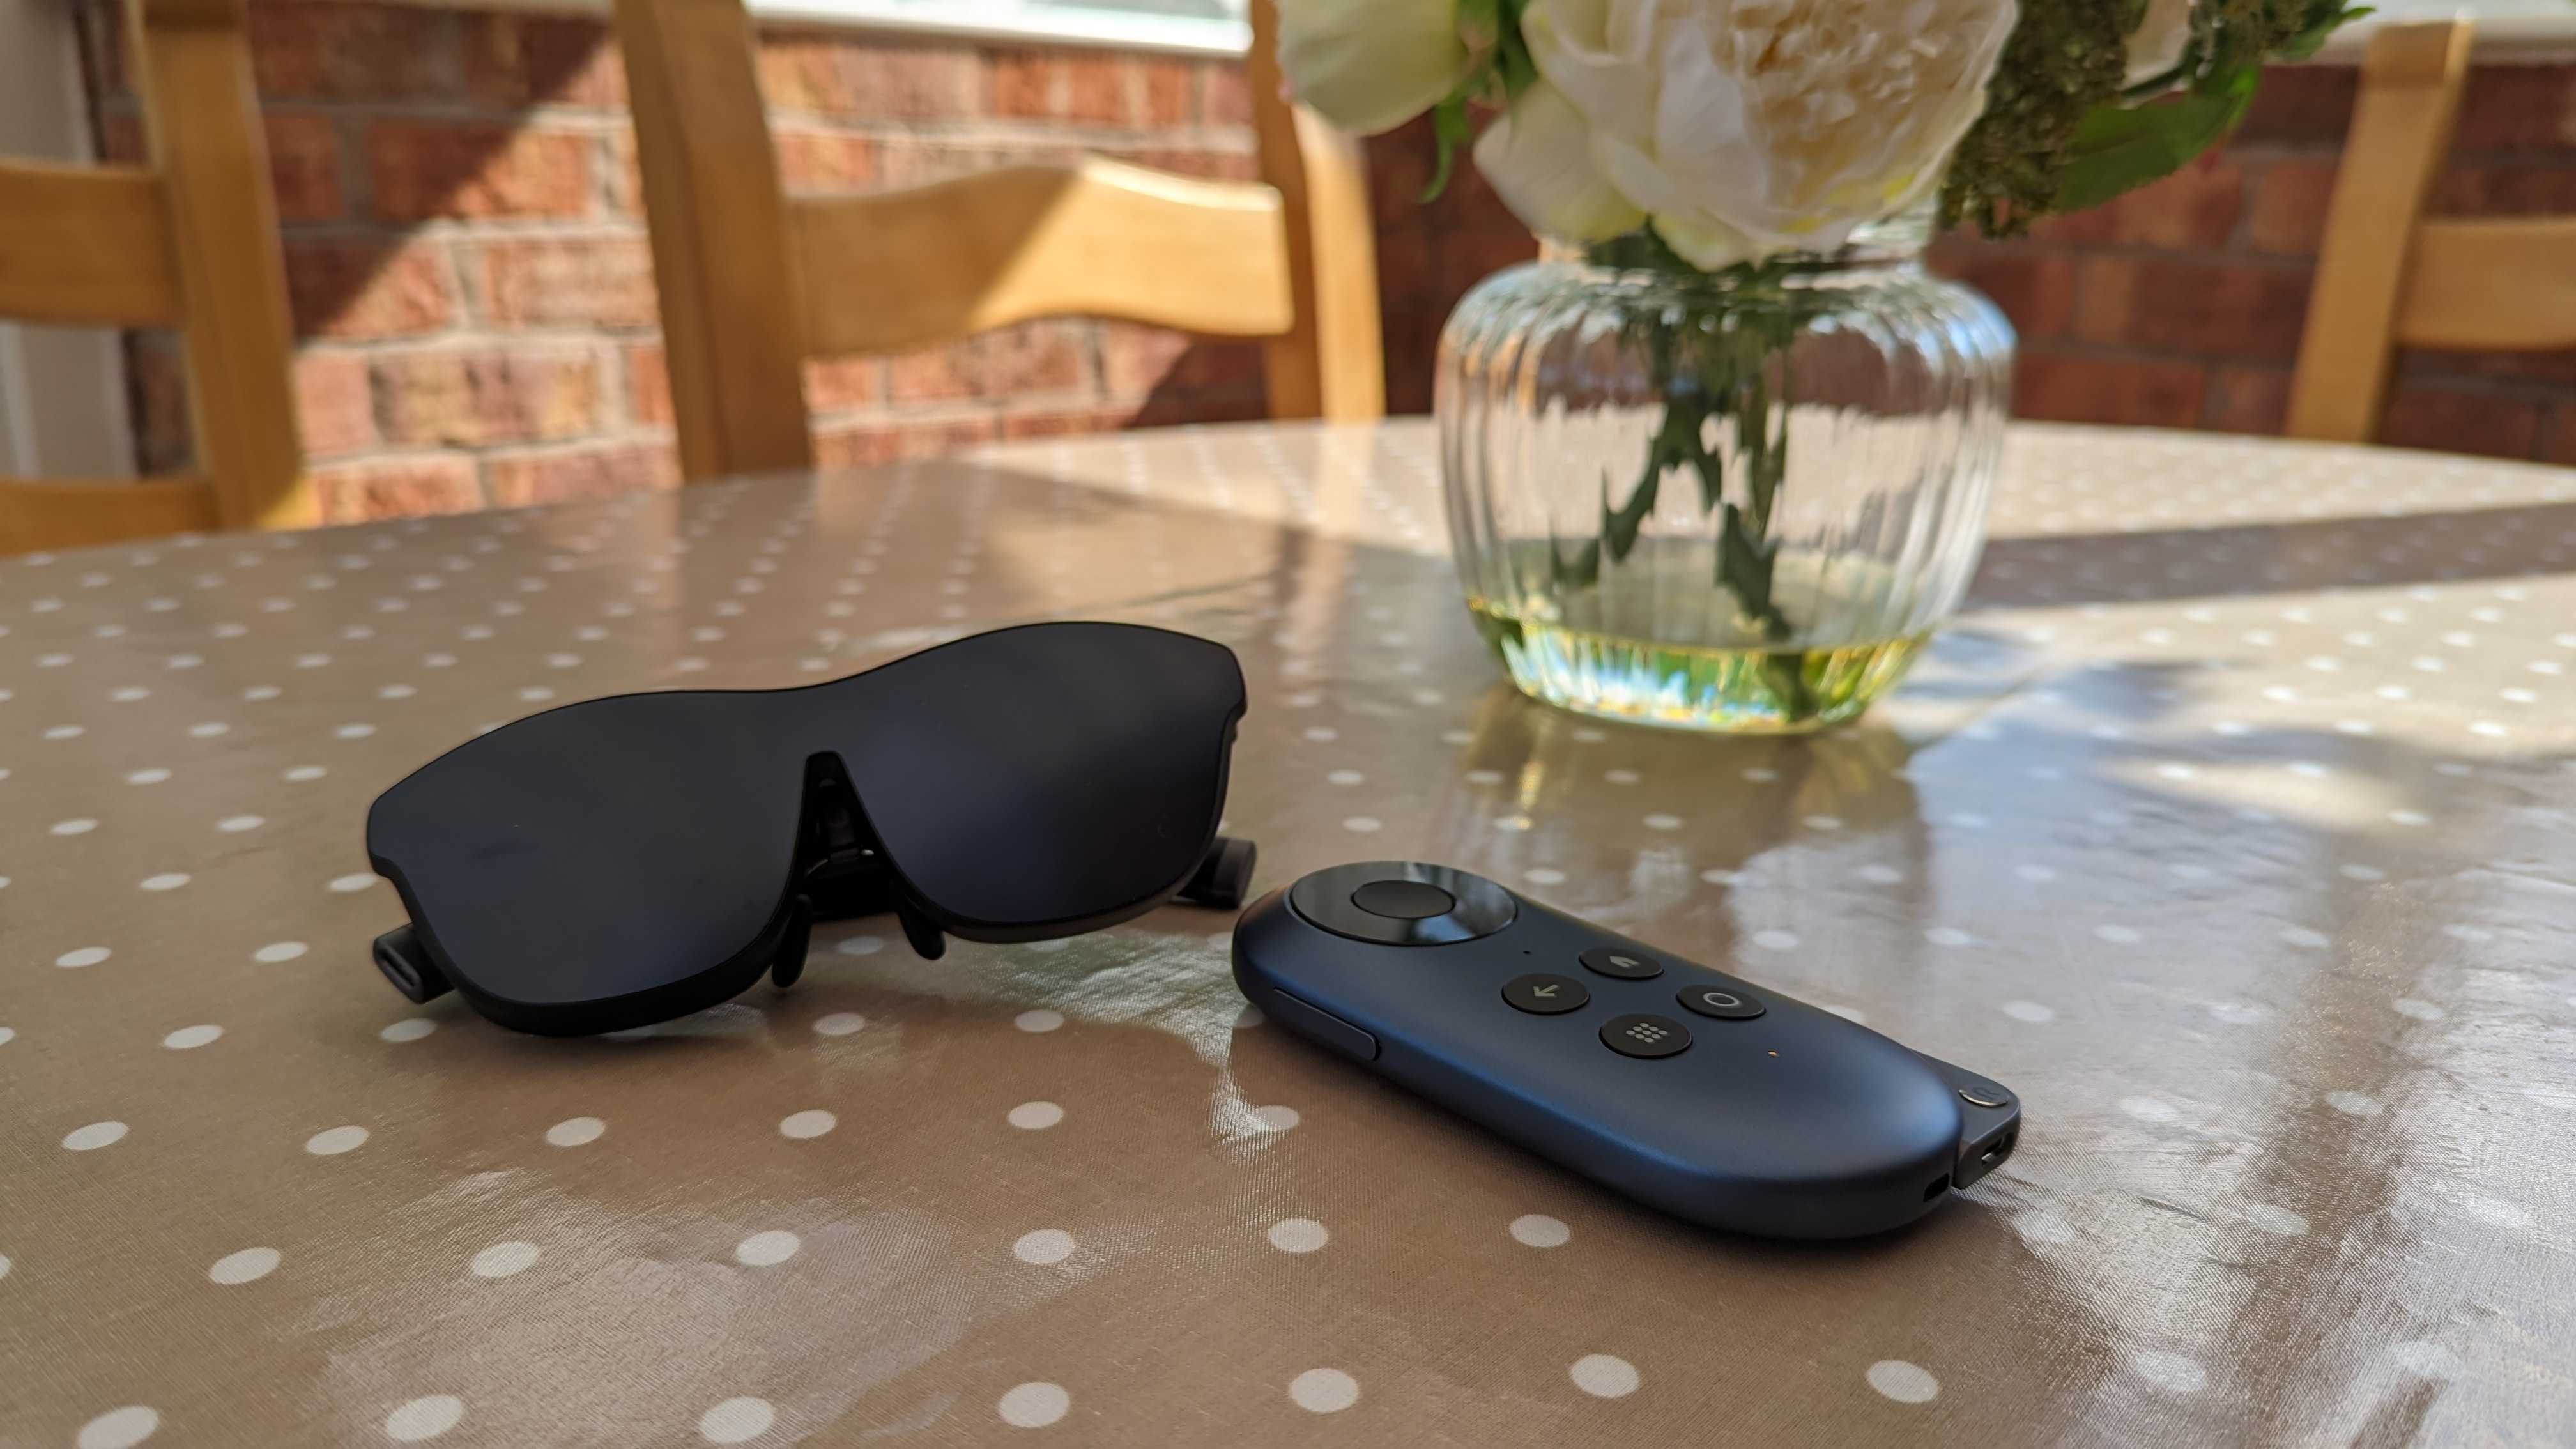 The Rokid Max AR glasses with a cover and the Rokid Station sat on a polka dot covered table